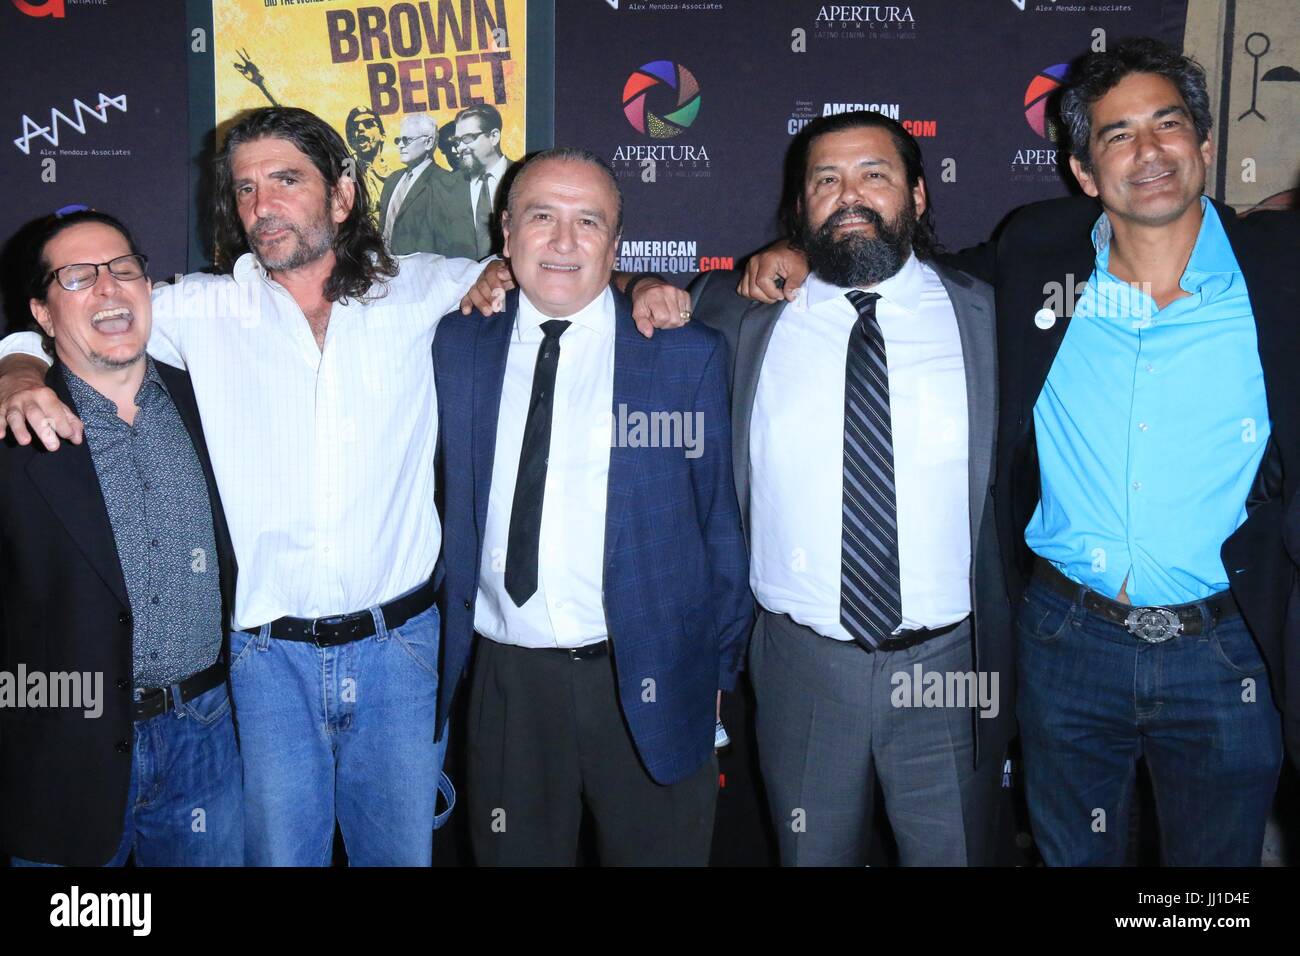 Hollywood Screening of 'The Last Brown Beret' at the Egyptian Theatre on Hollywood Boulevard in Los Angeles, California.  Featuring: Christopher Long, David Castro, Del Zamora, Daniel E. Mora, Randy Vasquez Where: Los Angeles, California, United States When: 14 Jun 2017 Credit: WENN.com Stock Photo